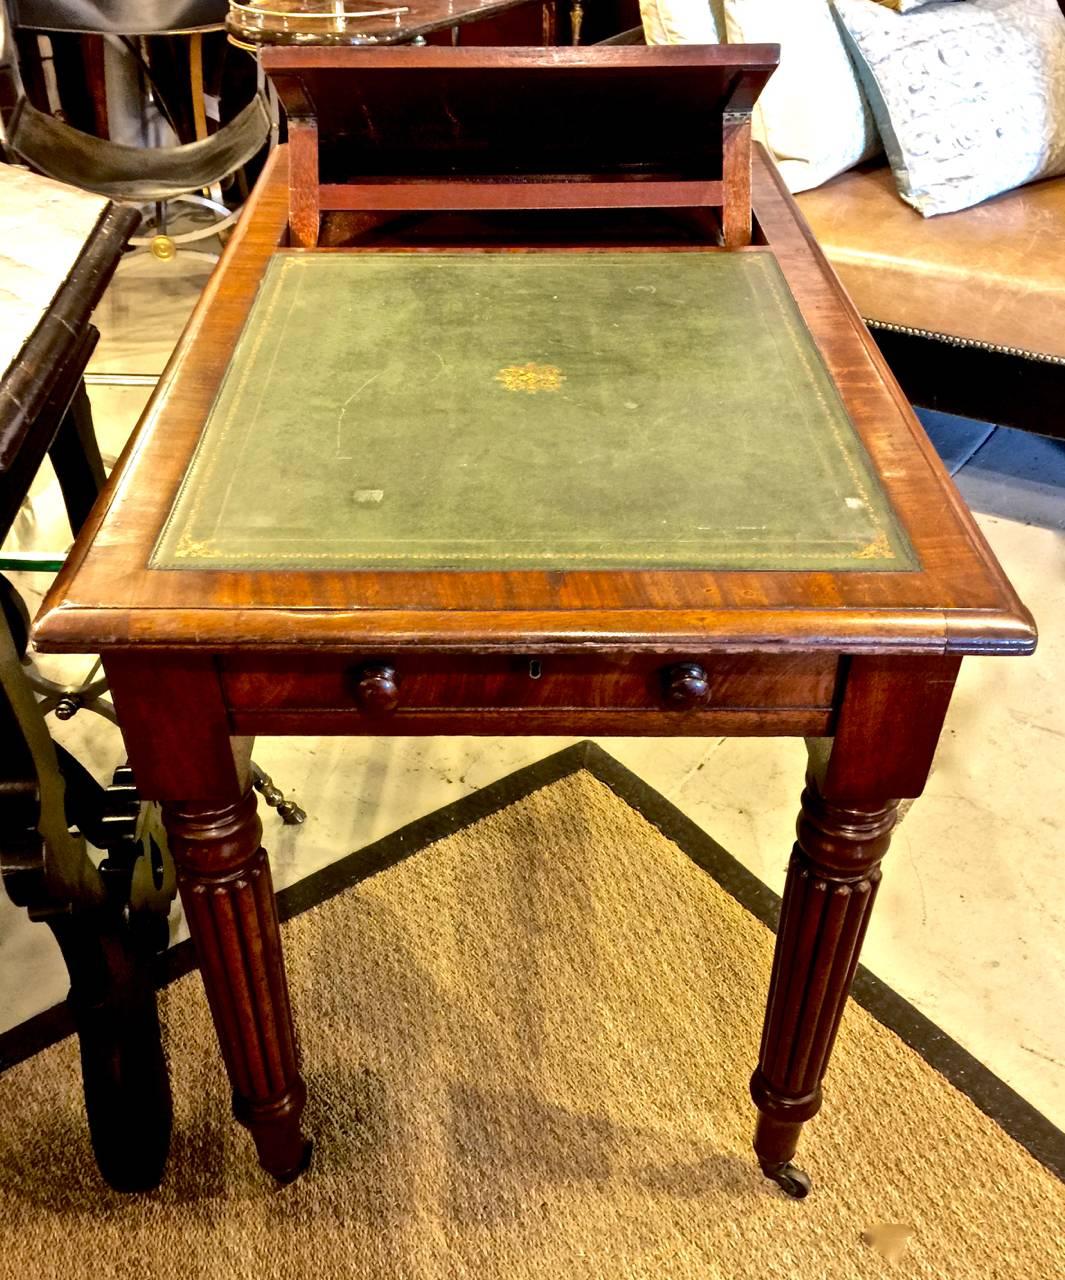 Brass Regency or William IV Writing Table/Desk with Book Stand